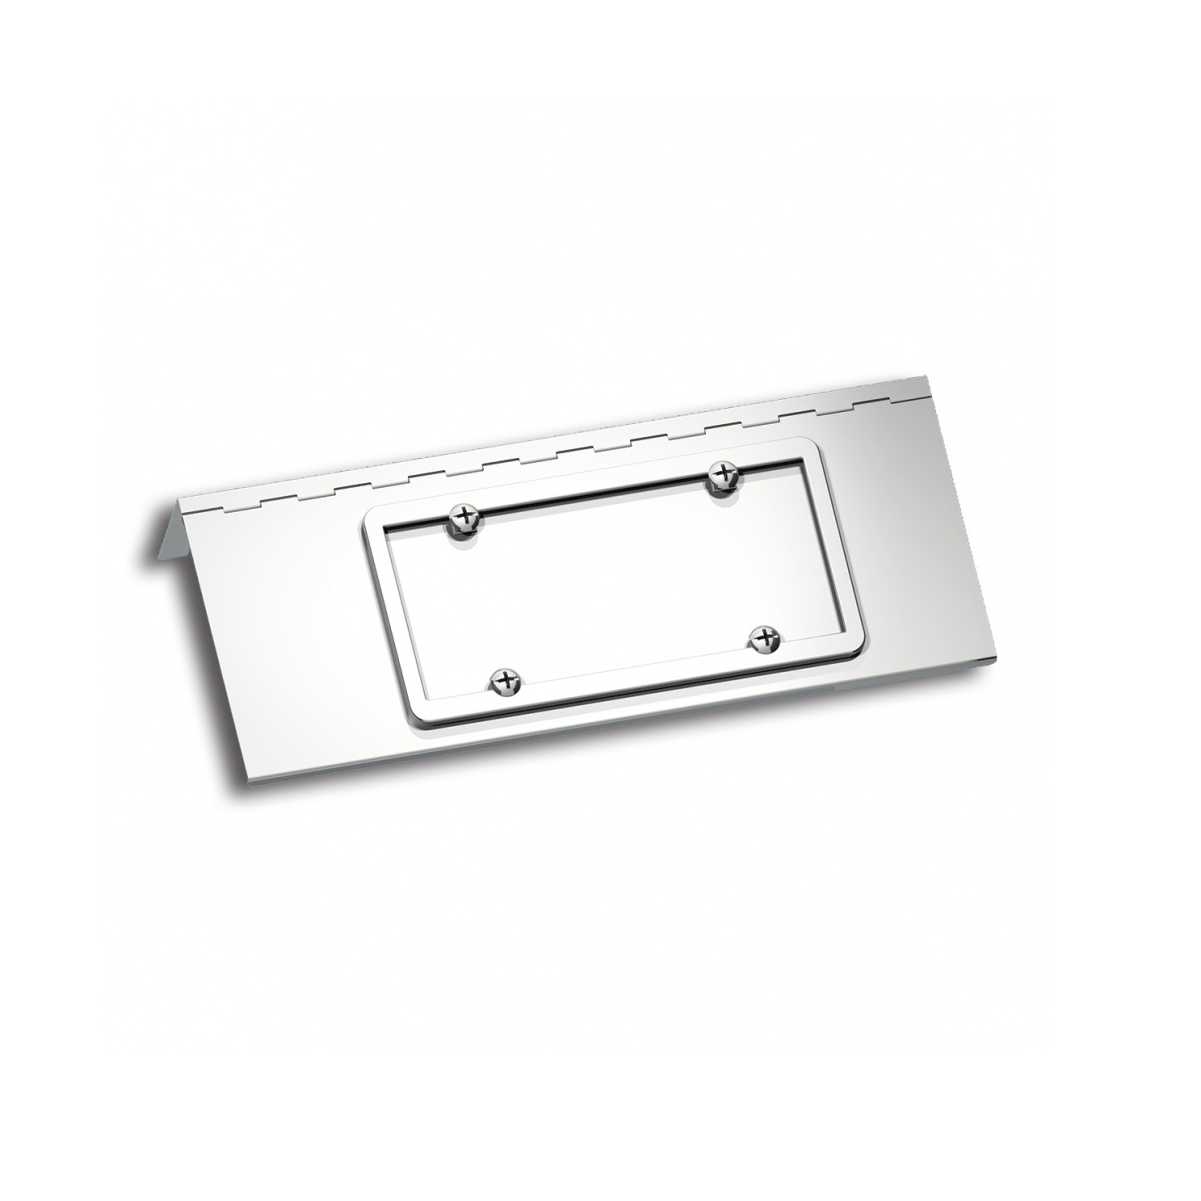 Single License Swing Plate for 2008-2015 Peterbilt 388 and 2008-2022 Peterbilt 389 - Polished Stainless Steel